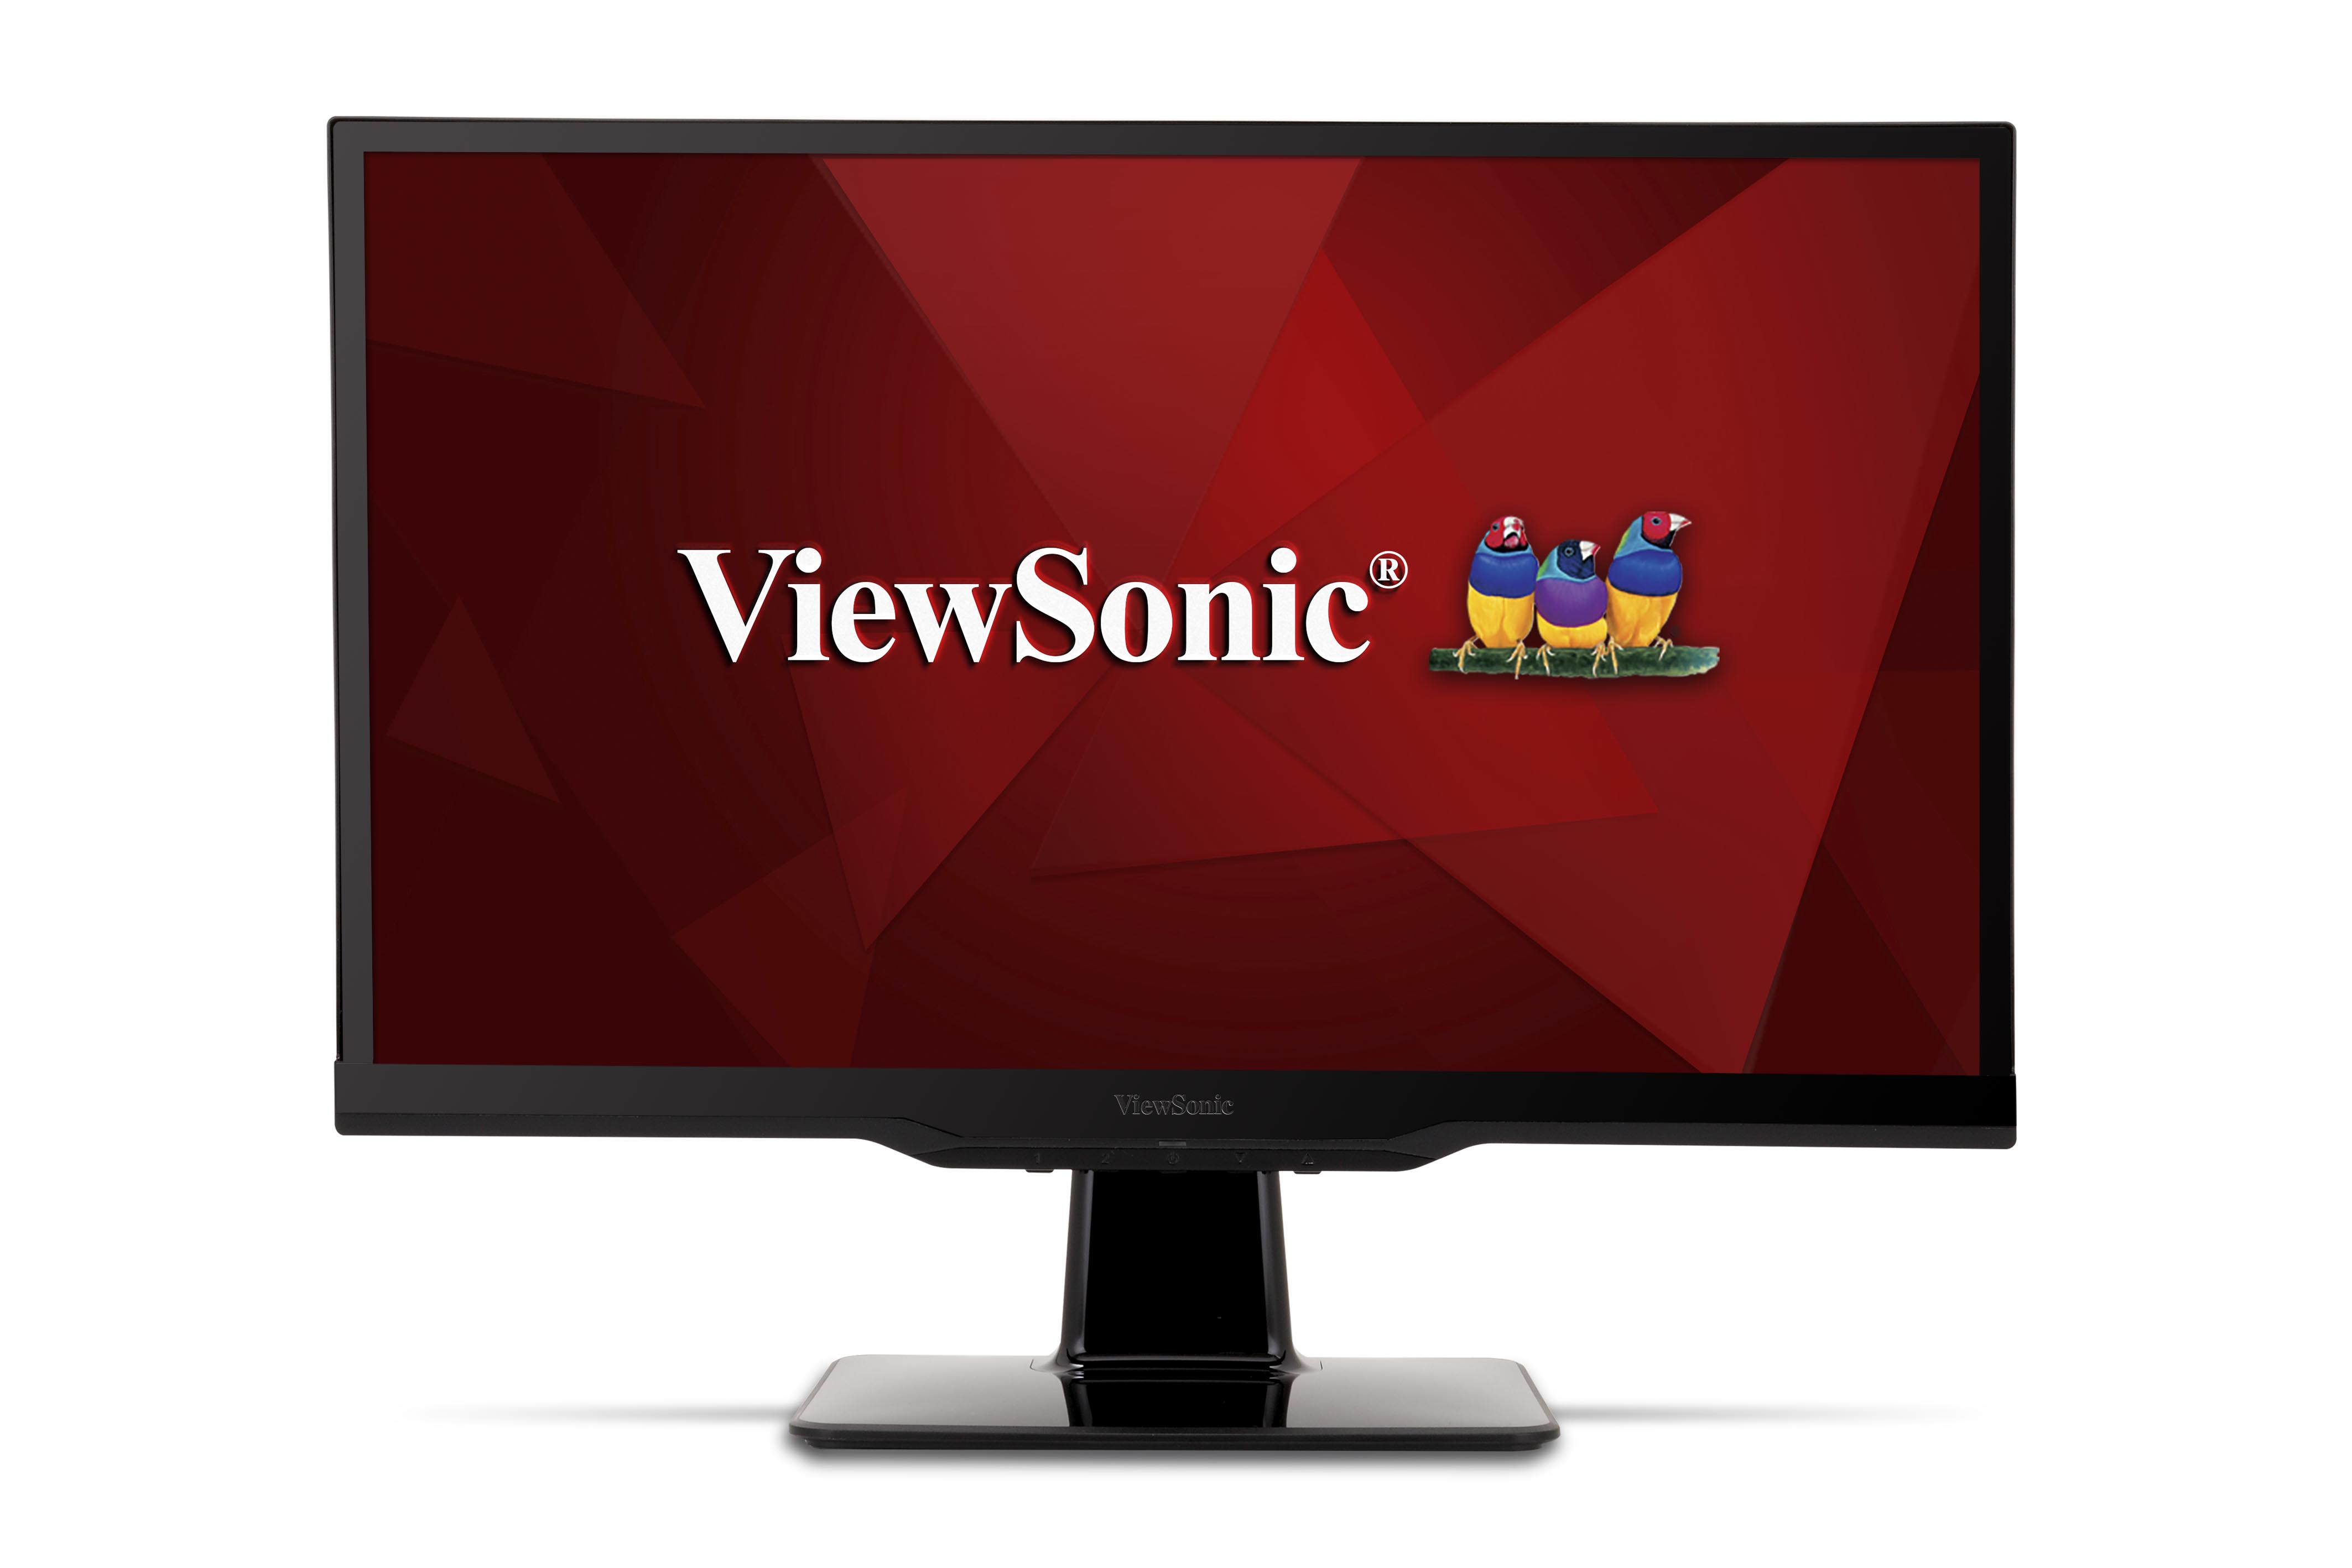 download viewsonic drivers for windows 10